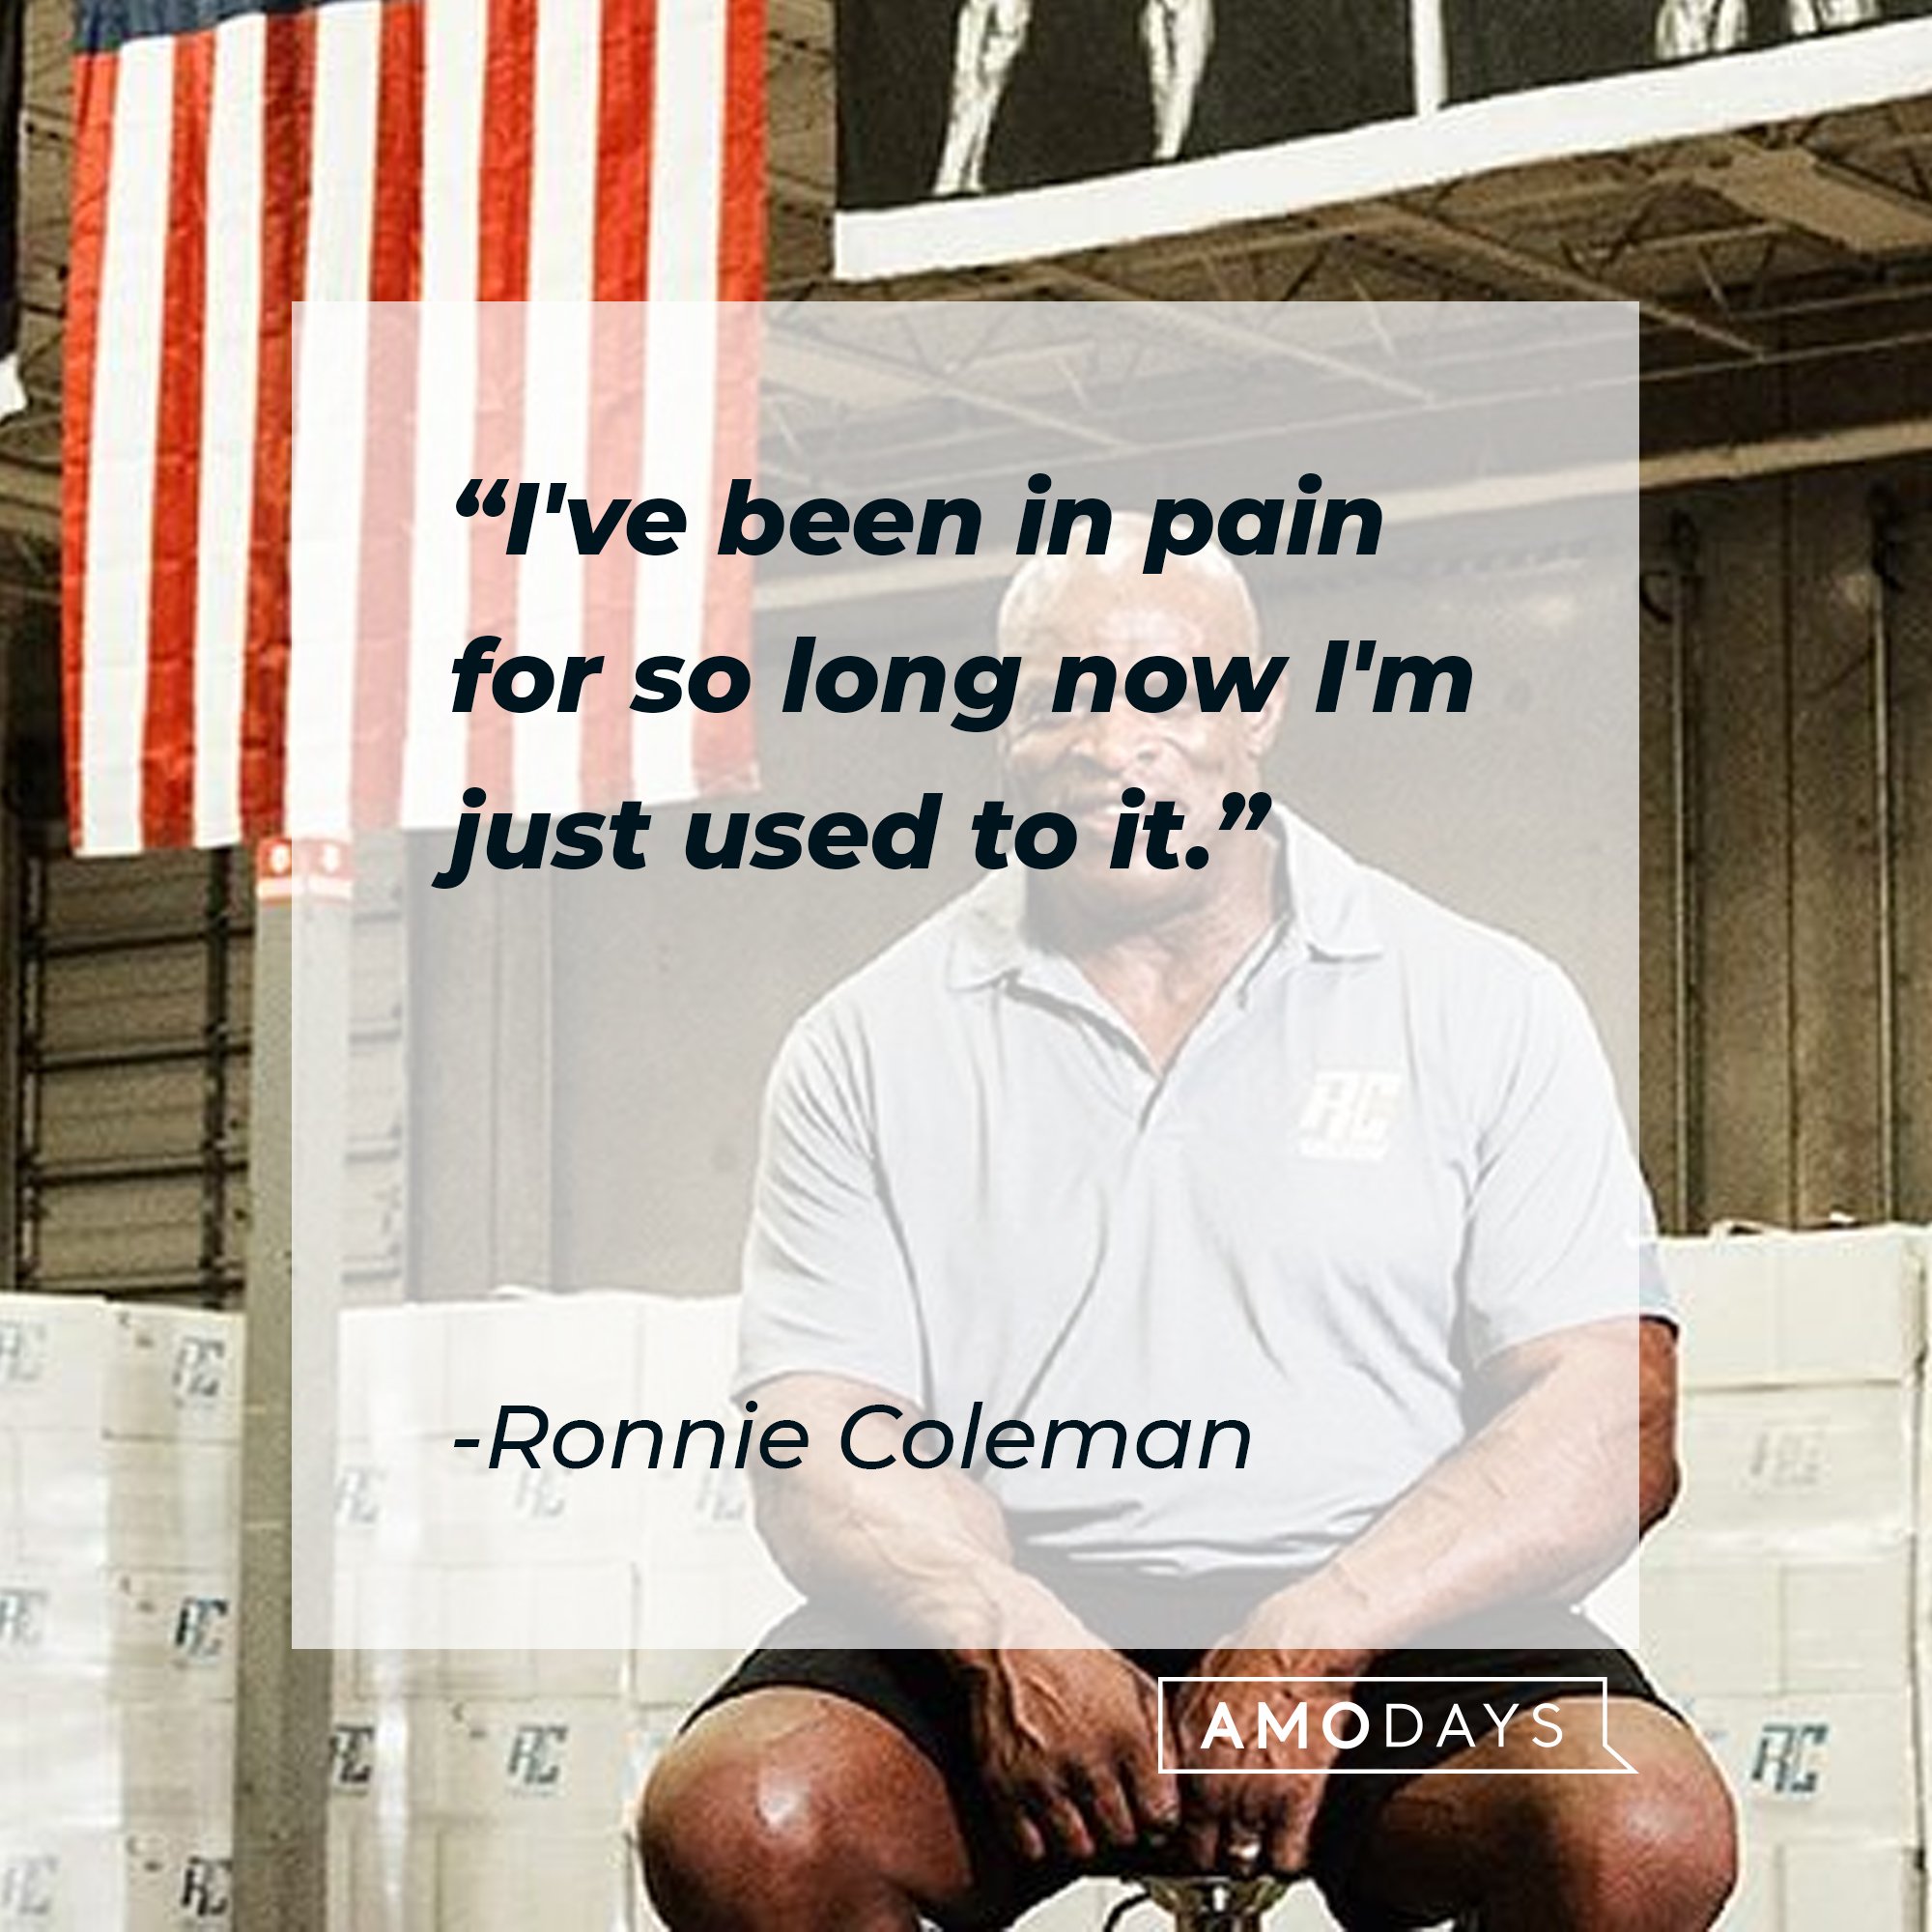  Ronnie Coleman’s quote: “I've been in pain for so long now I'm just used to it.” | Image: AmoDays